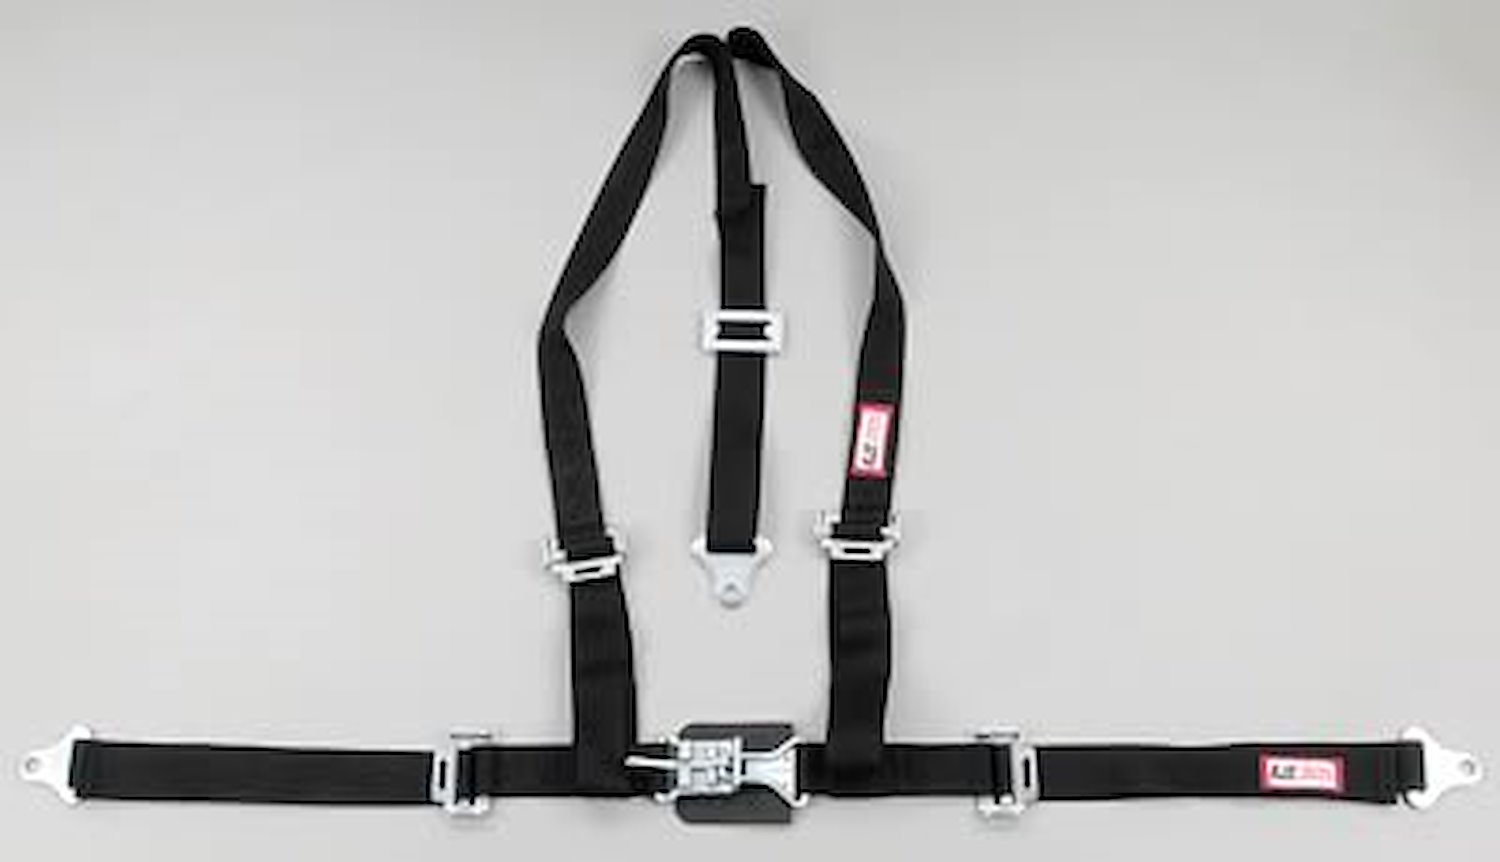 NON-SFI L&L HARNESS 3 PULL DOWN Lap Belt w/adjuster 2 S.H. V ROLL BAR Mount ALL WRAP ENDS BLUE